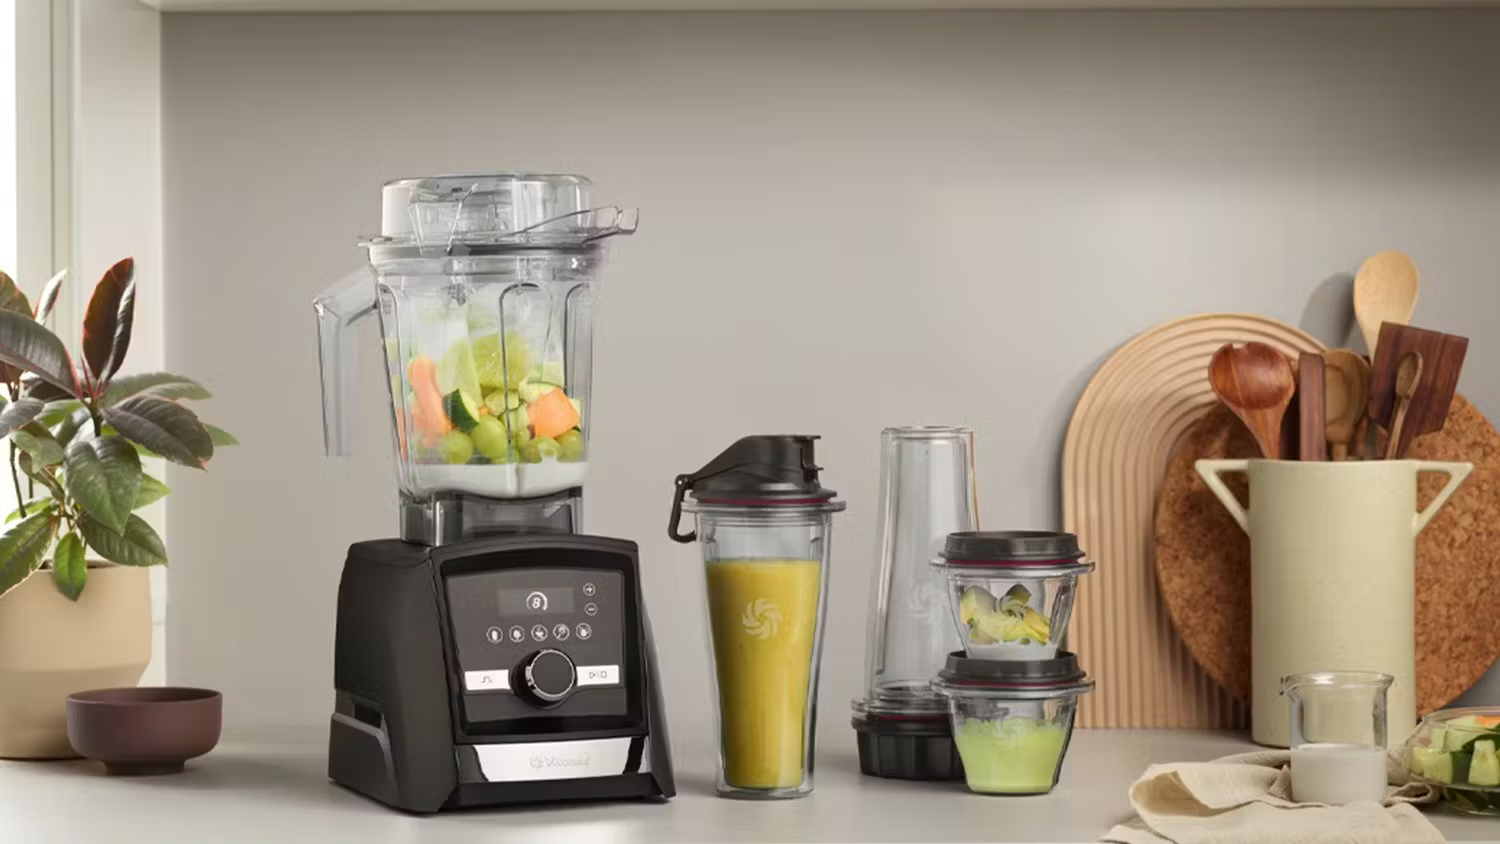 Load video:  Our most advanced blender features 5 program settings (for Smoothies, Hot Soups, Dips &amp; Spreads, Frozen Desserts, and Self-Cleaning) that automatically adjust to your container size, process your recipes, and stop the blender when complete. Touchscreen controls are easily wiped clean, and a programmable built-in timer helps you achieve your perfect blend, every time.